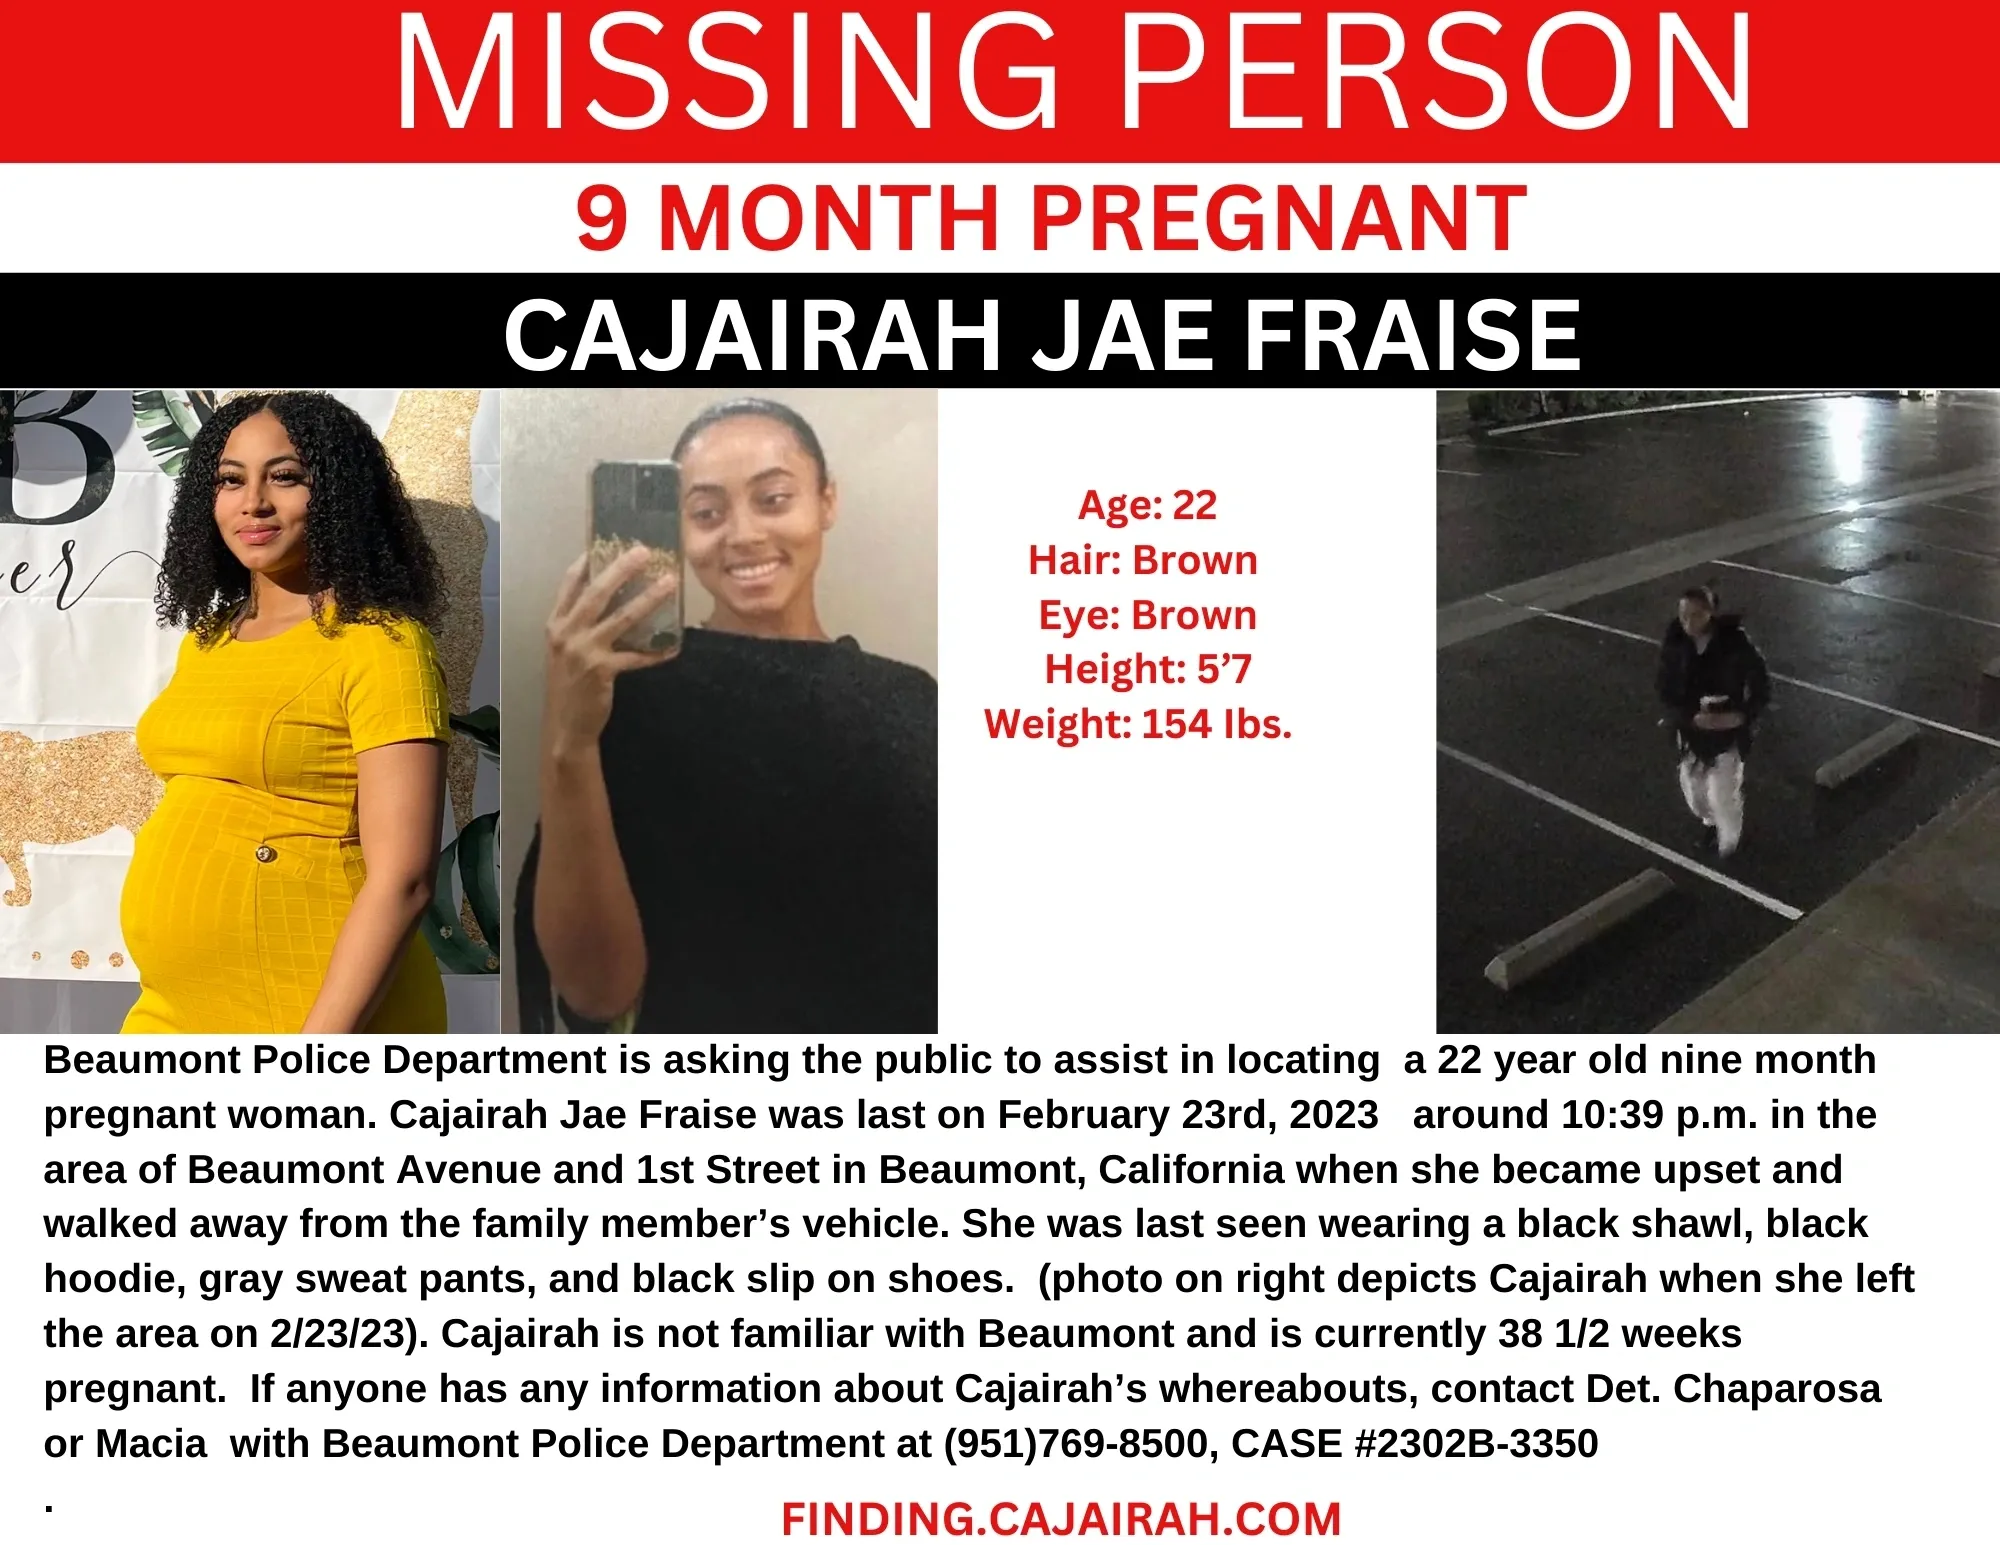 The Beaumont Police Department is actively investigating pregnant Cajairah Jae Fraise's disappearance and urges anyone with information to come forward. (Photo: Finding Cajairah)